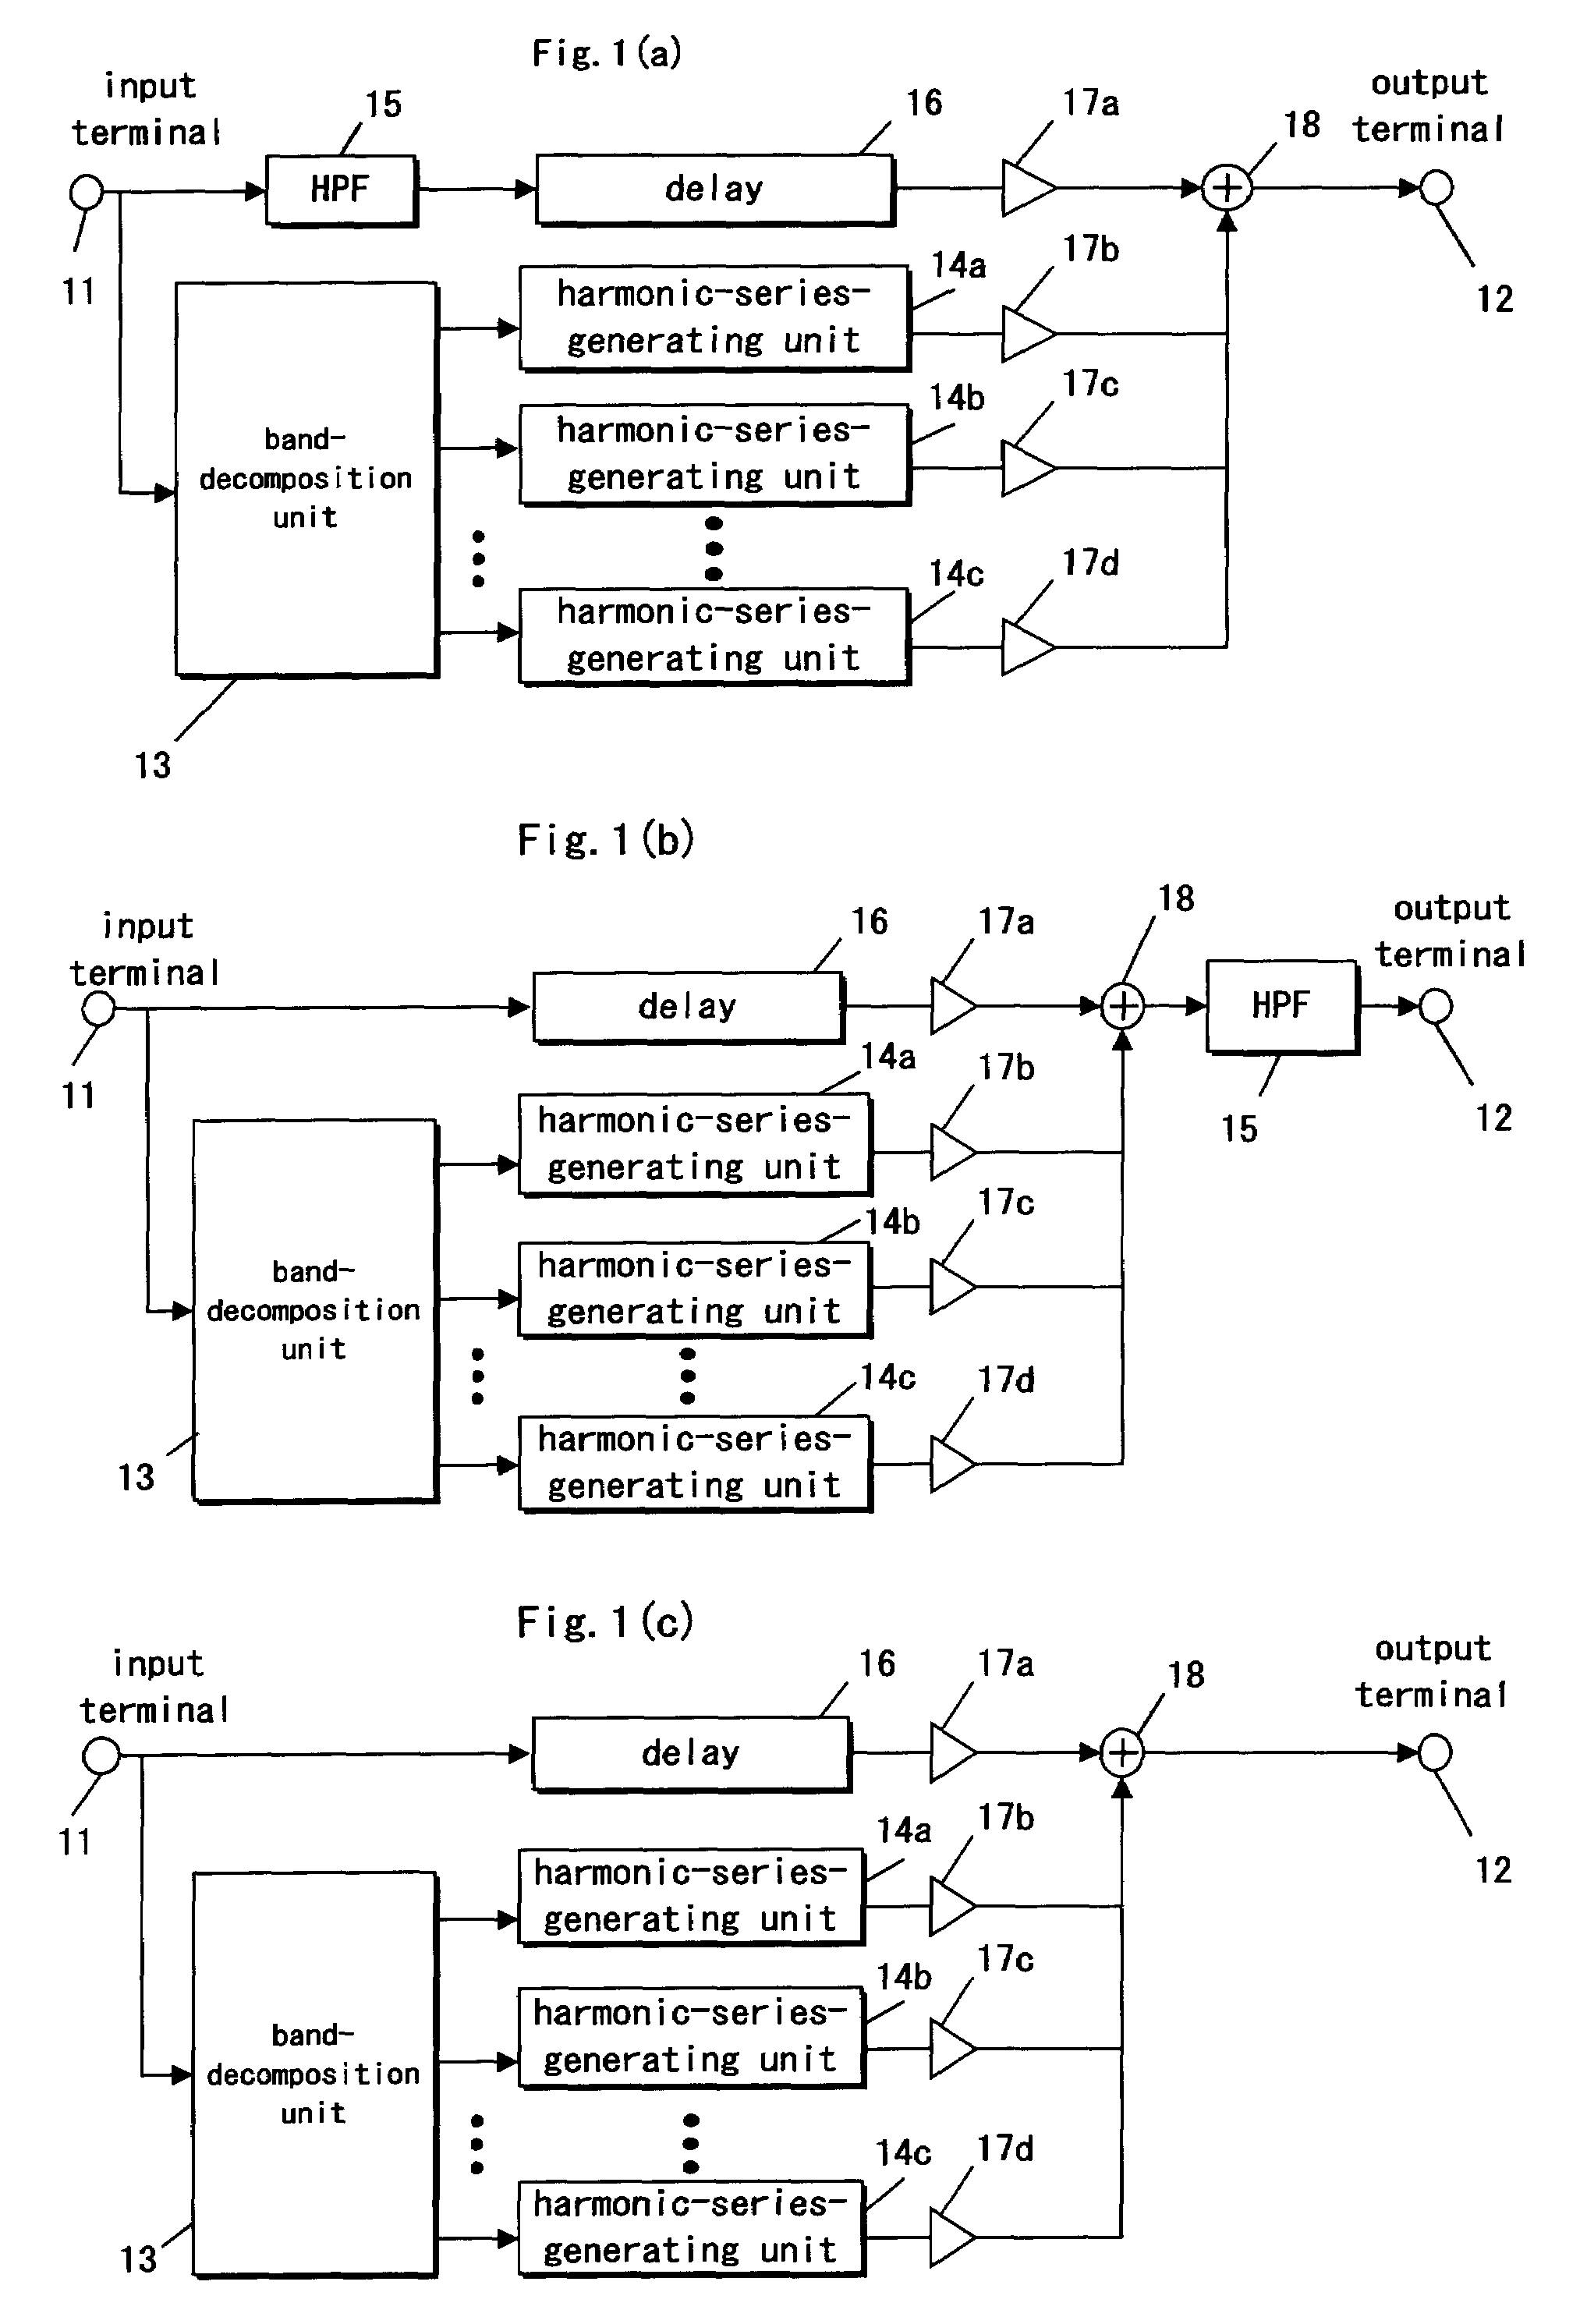 Apparatus and method for generating harmonics in an audio signal